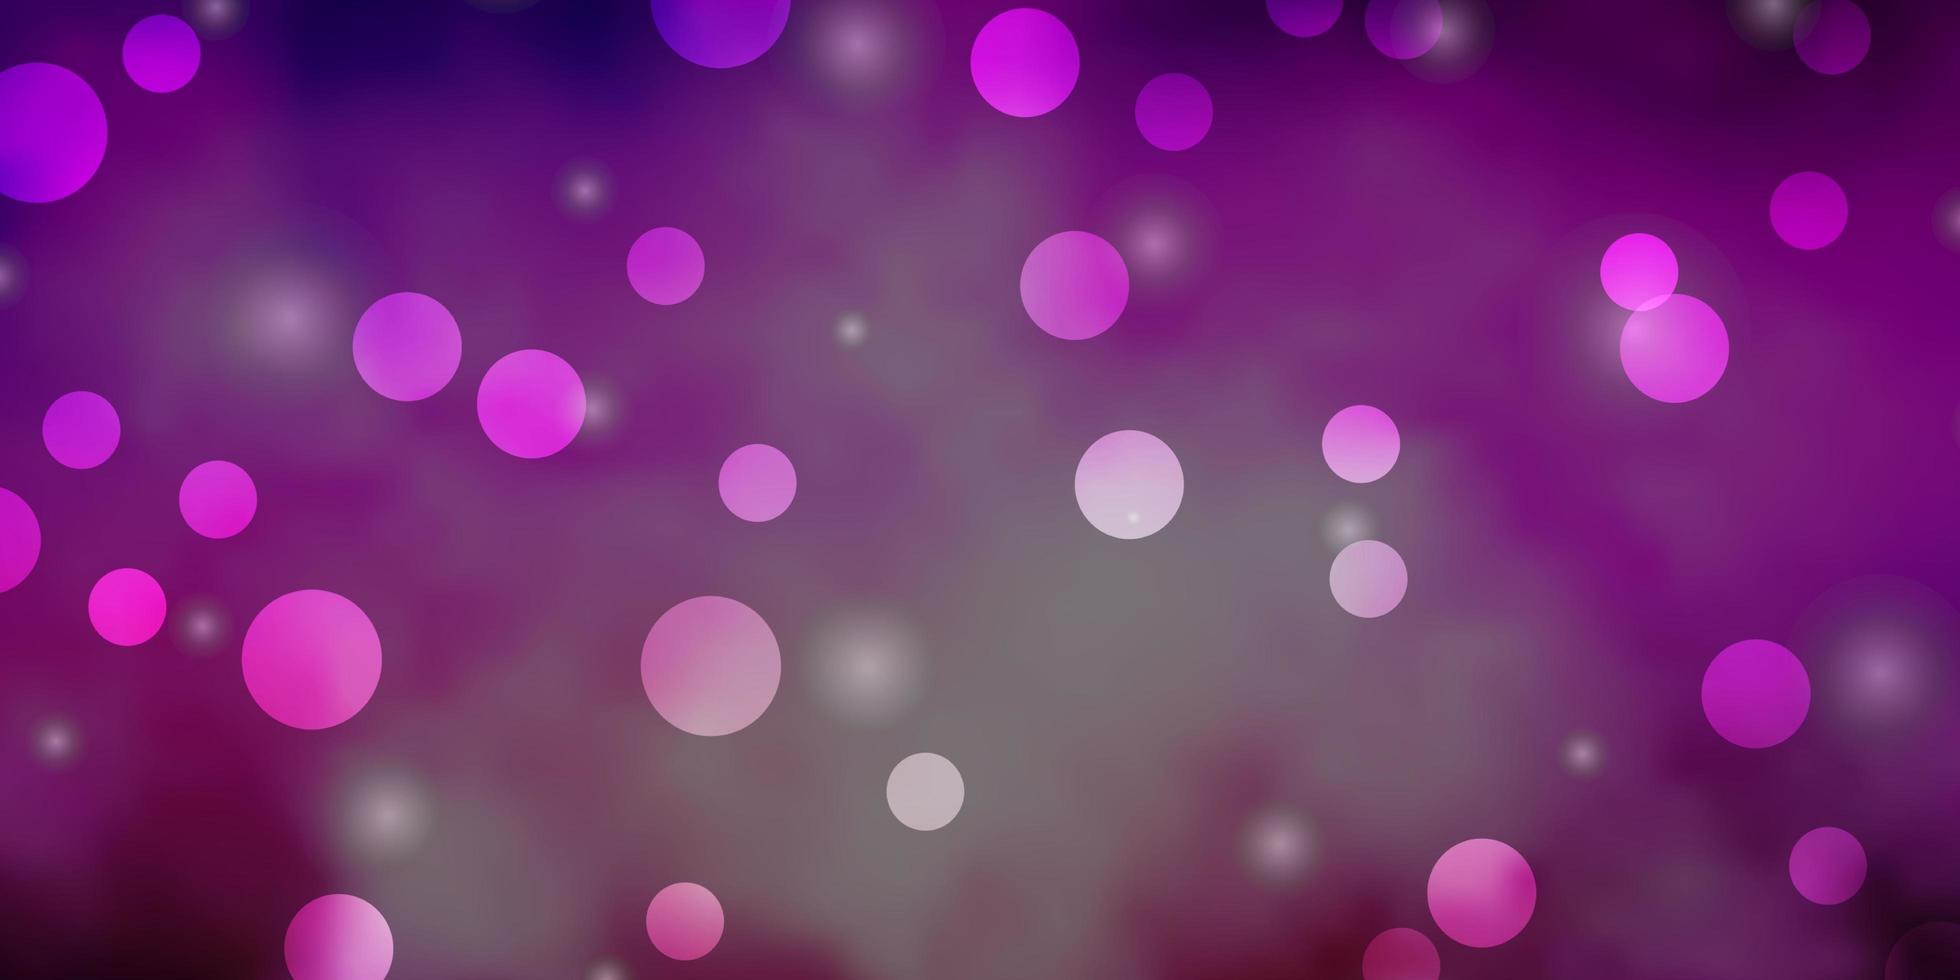 Dark Purple, Pink vector layout with circles, stars. Illustration with set of colorful abstract spheres, stars. Pattern for booklets, leaflets.